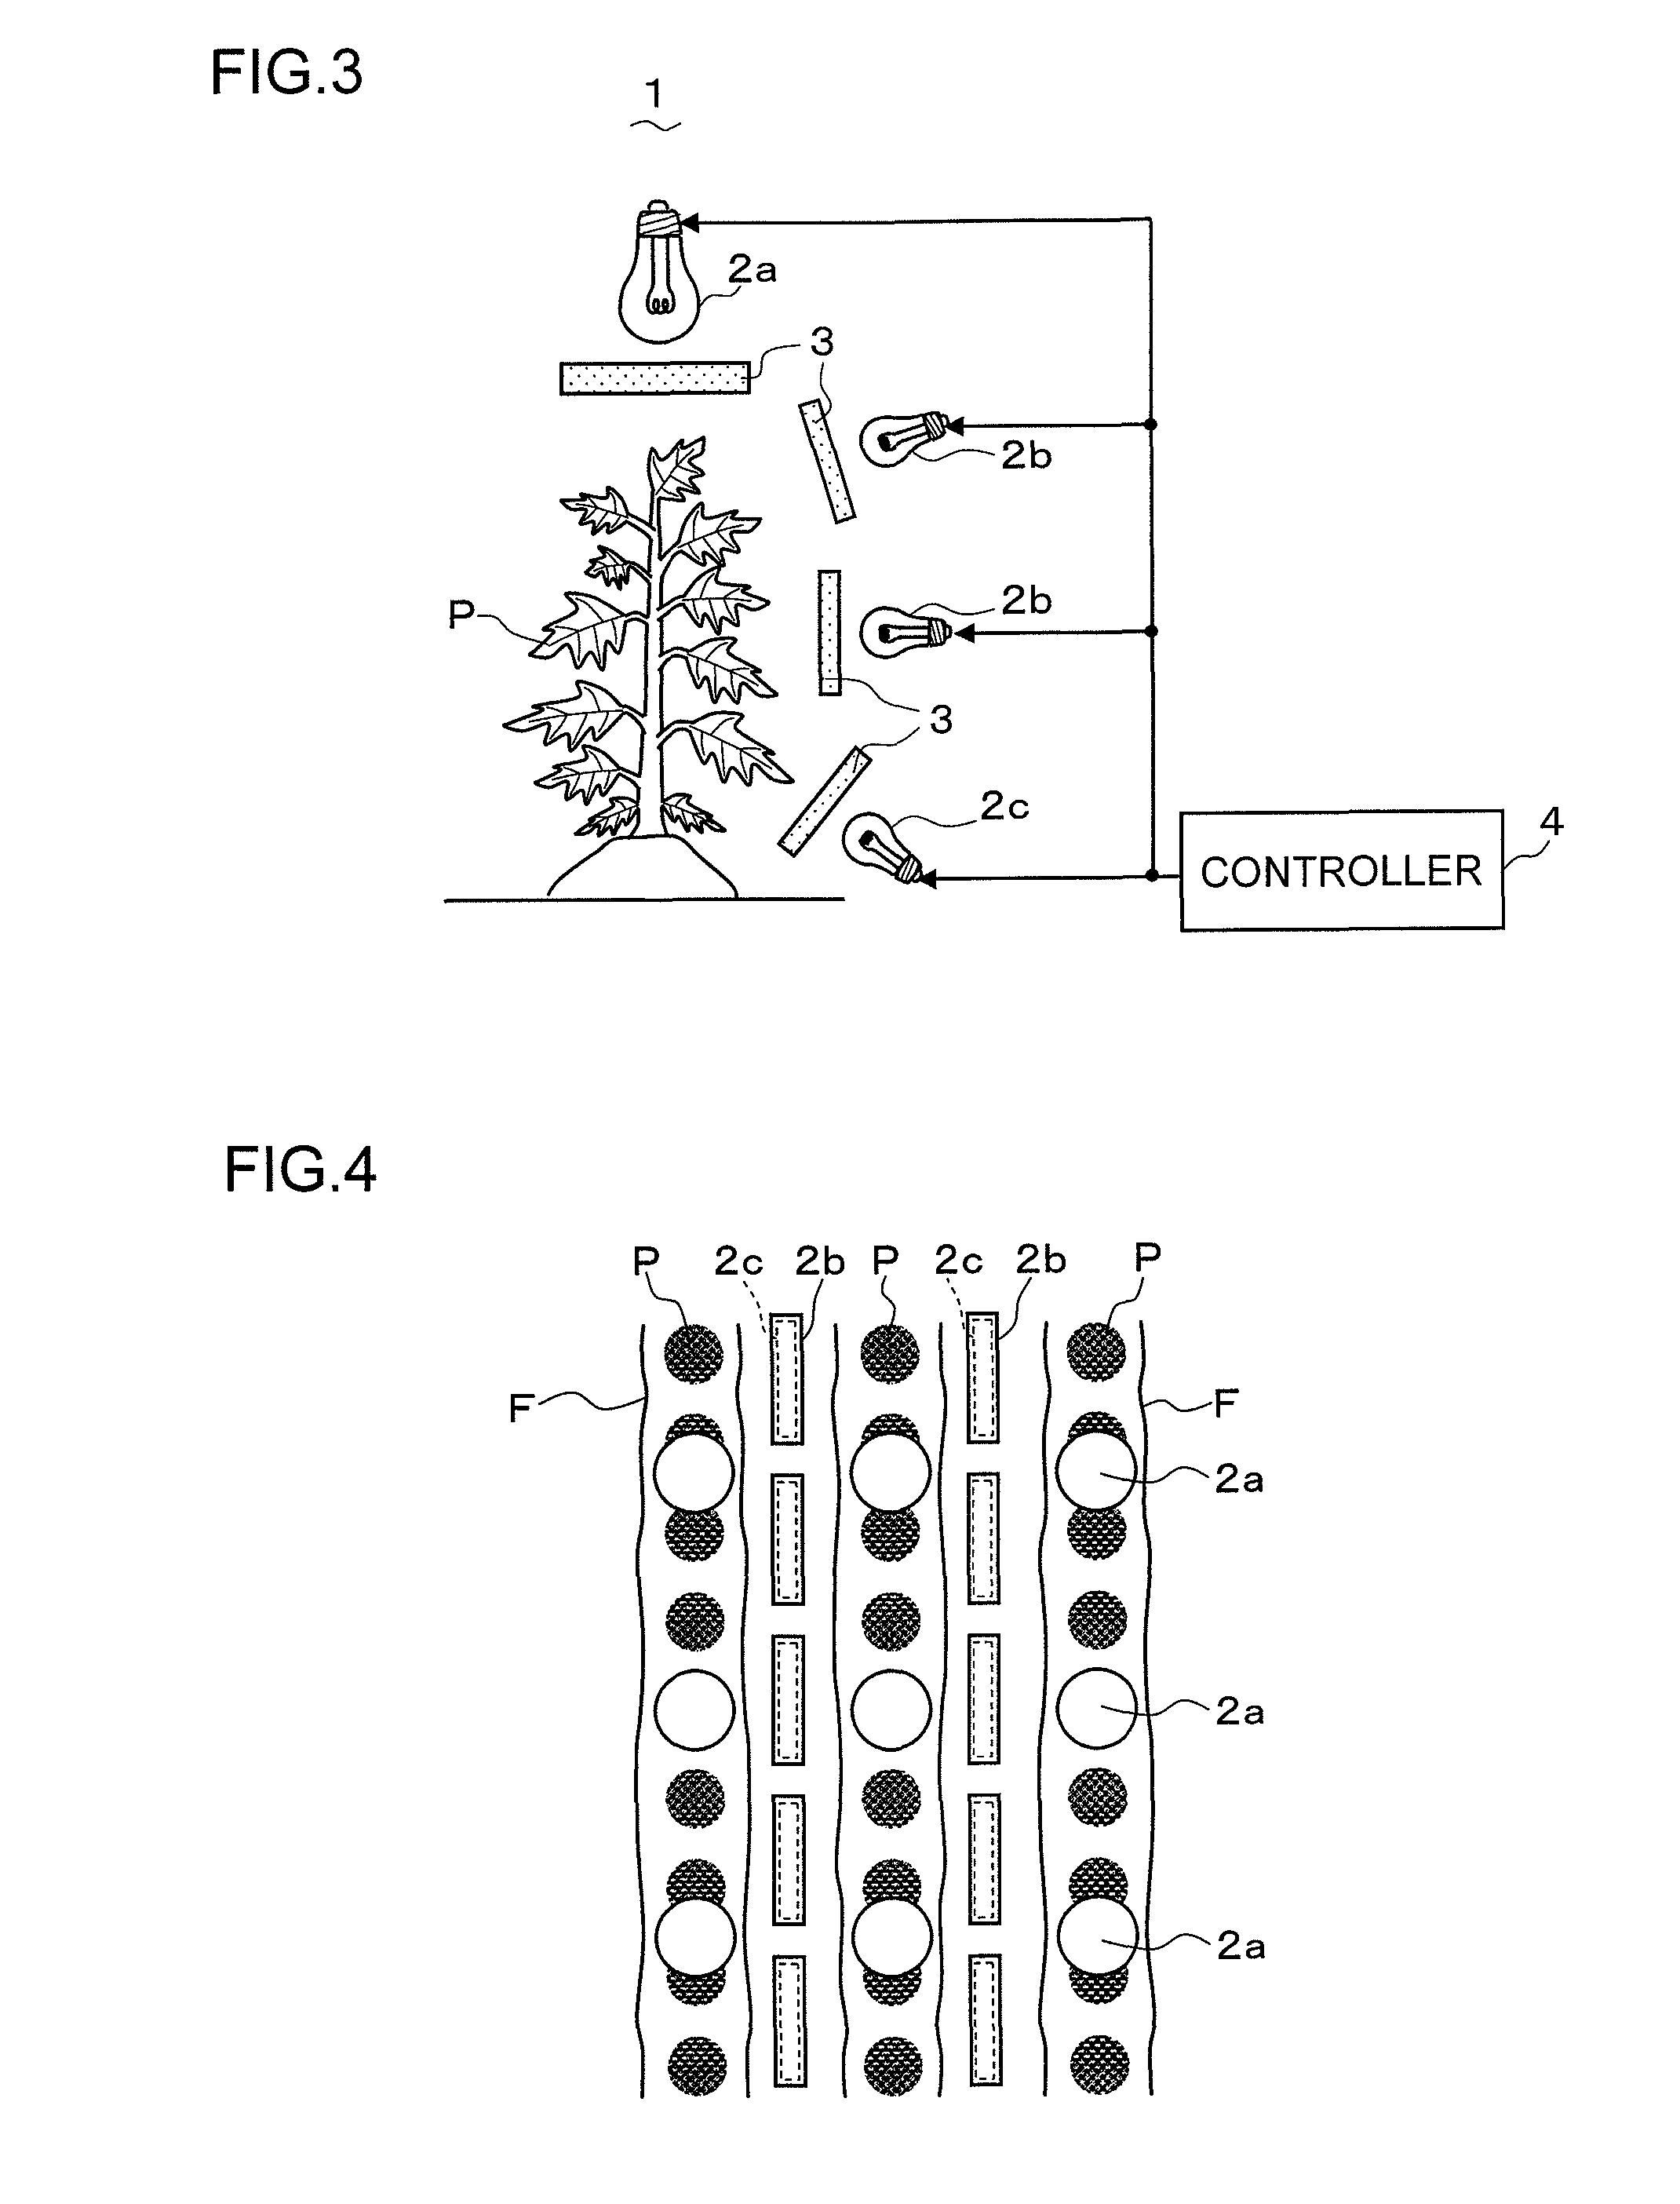 Lighting apparatus for controlling plant disease